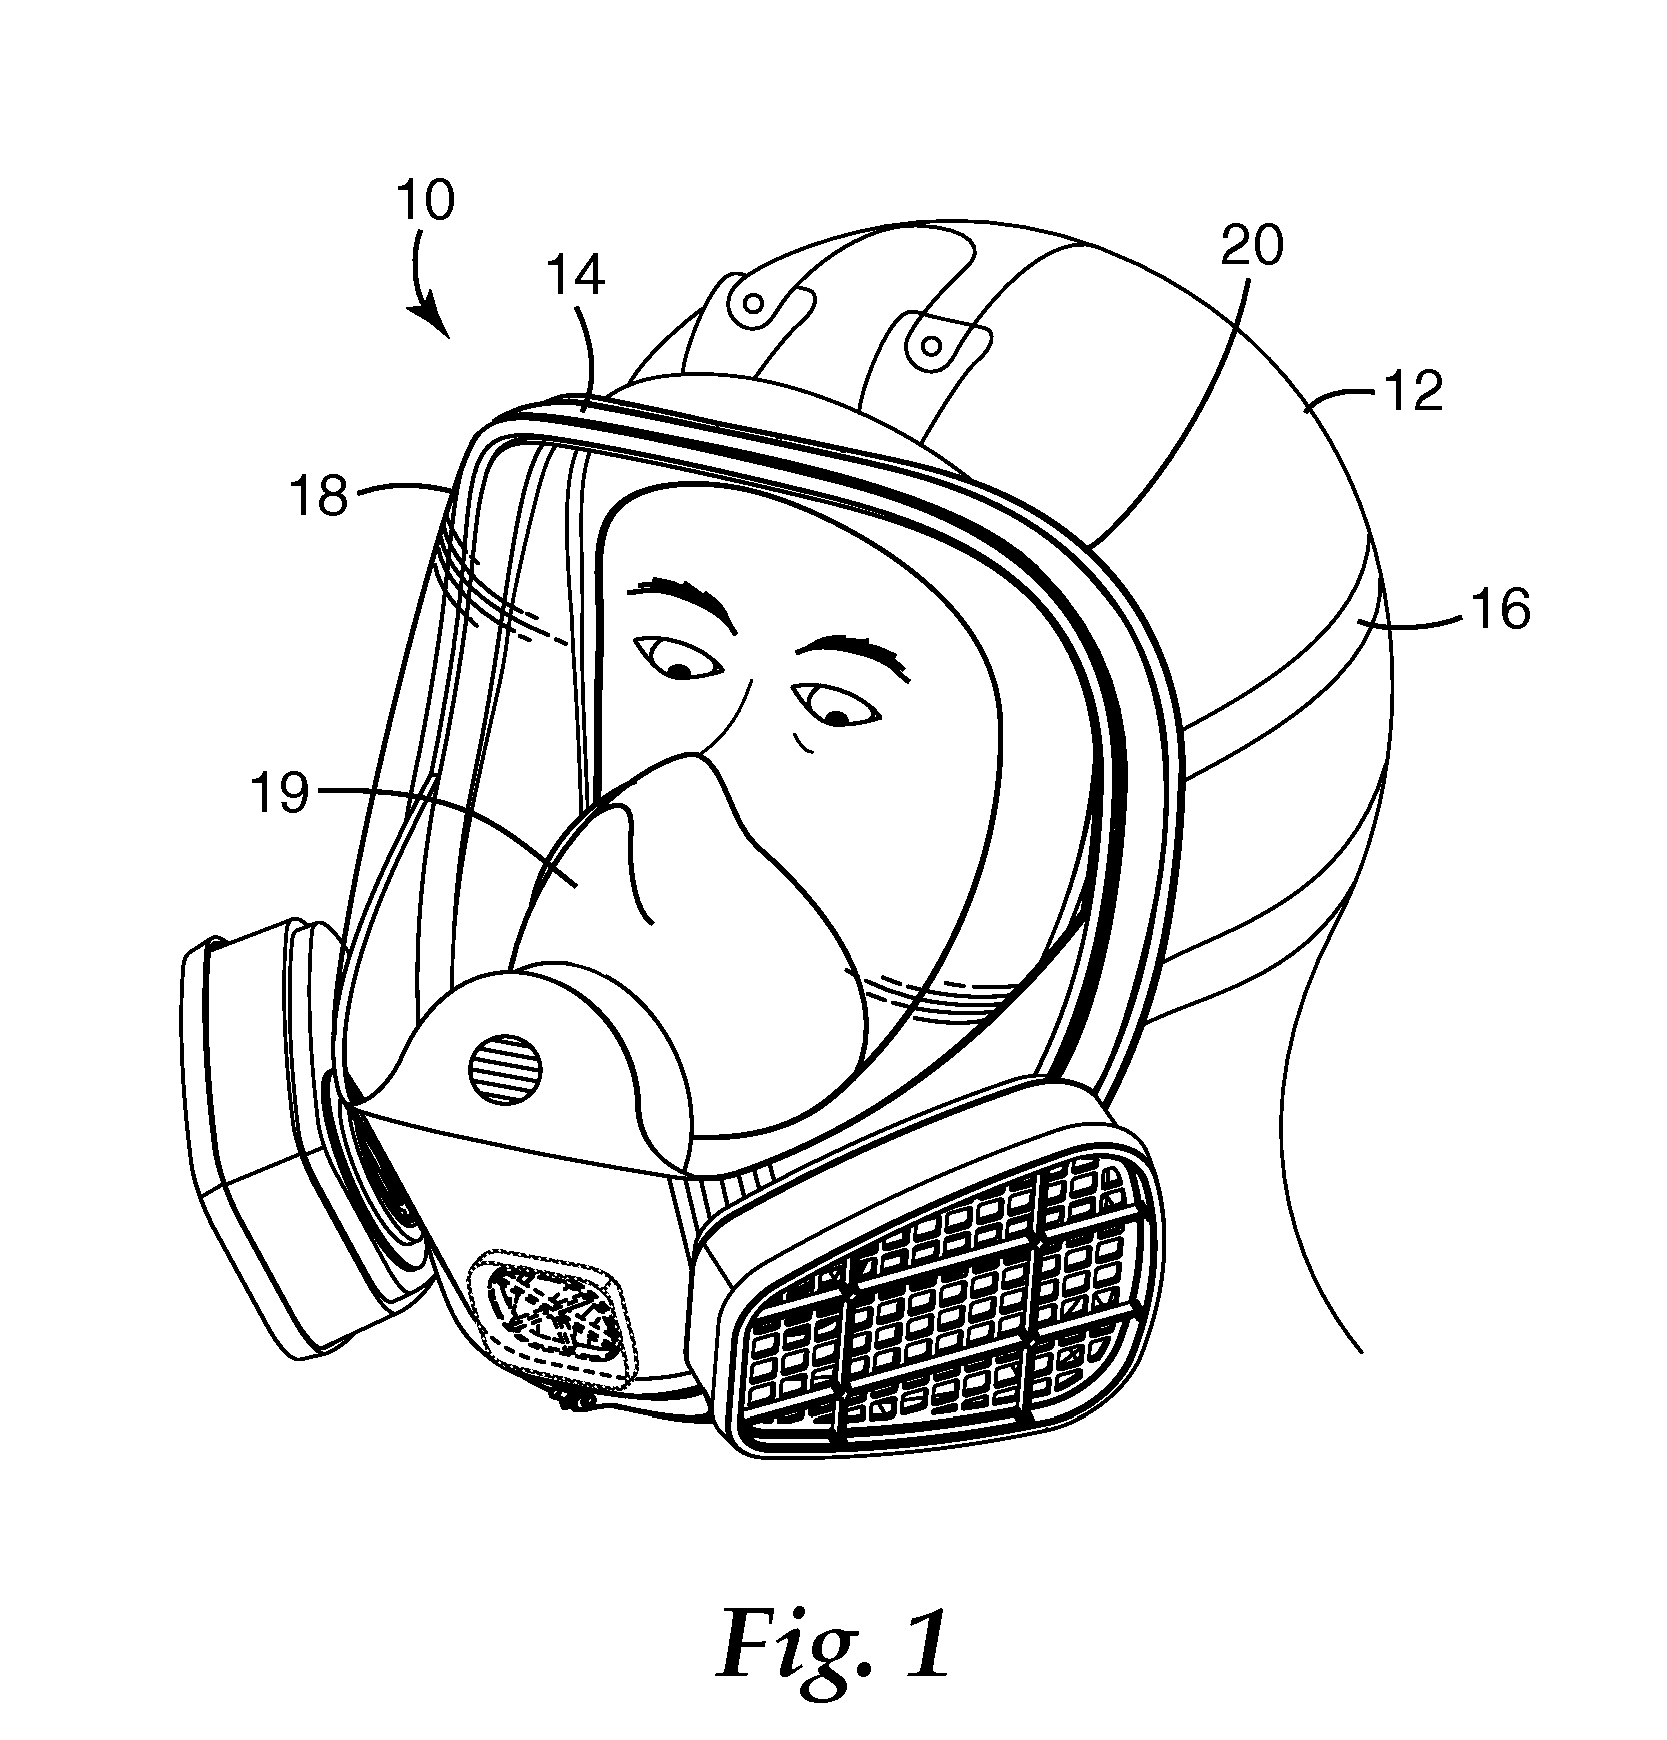 Respiratory protection device